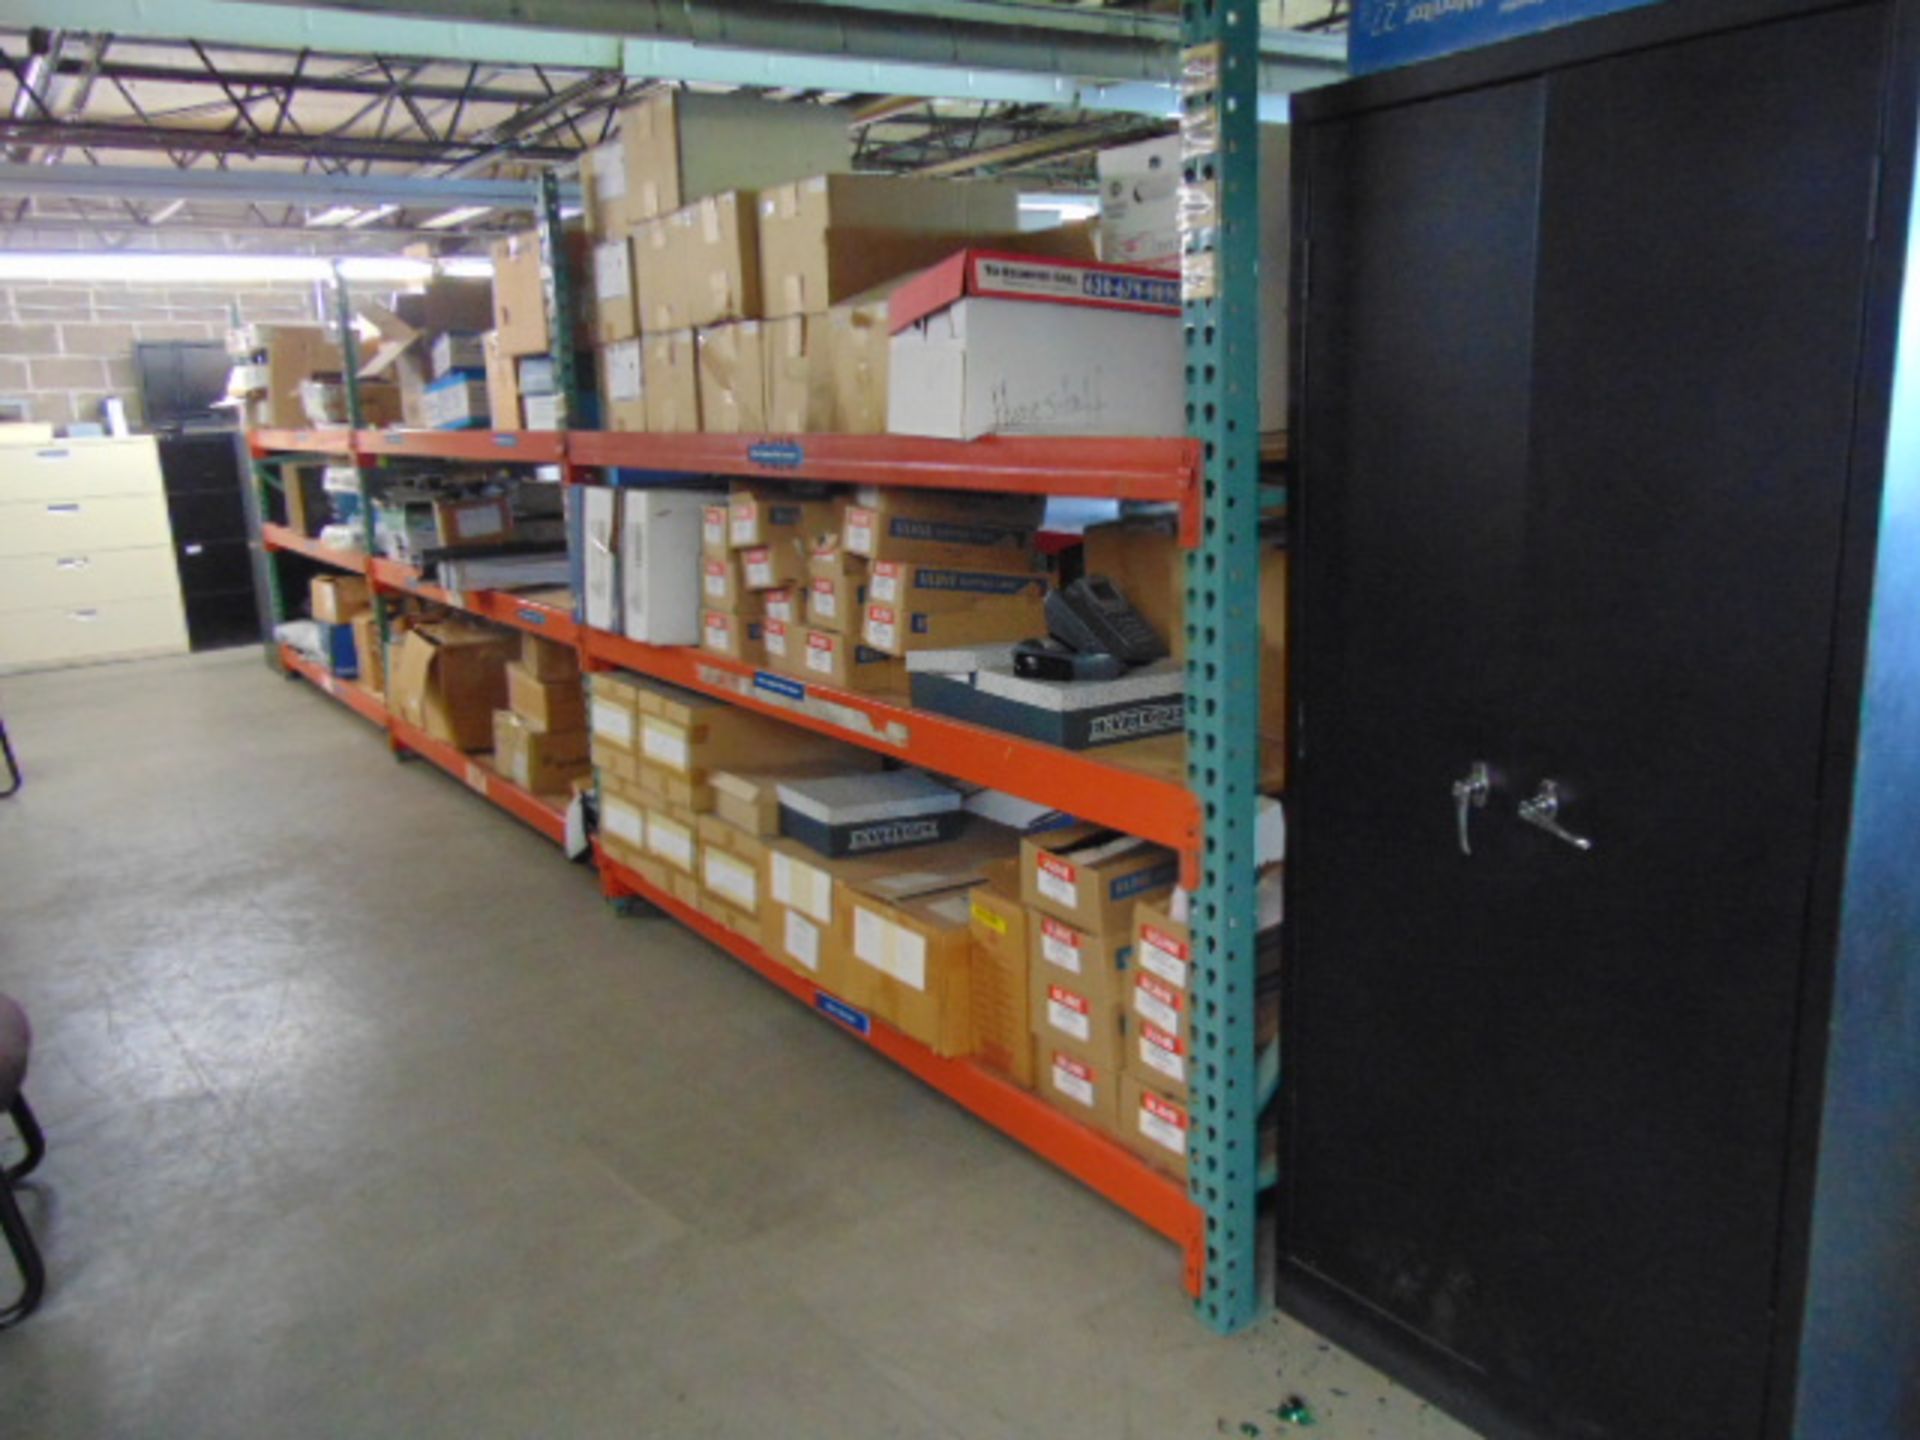 LOT CONTENTS OF MEZZANINE: (9) sections of pallet racking, (13) assorted file cabinets, assorted